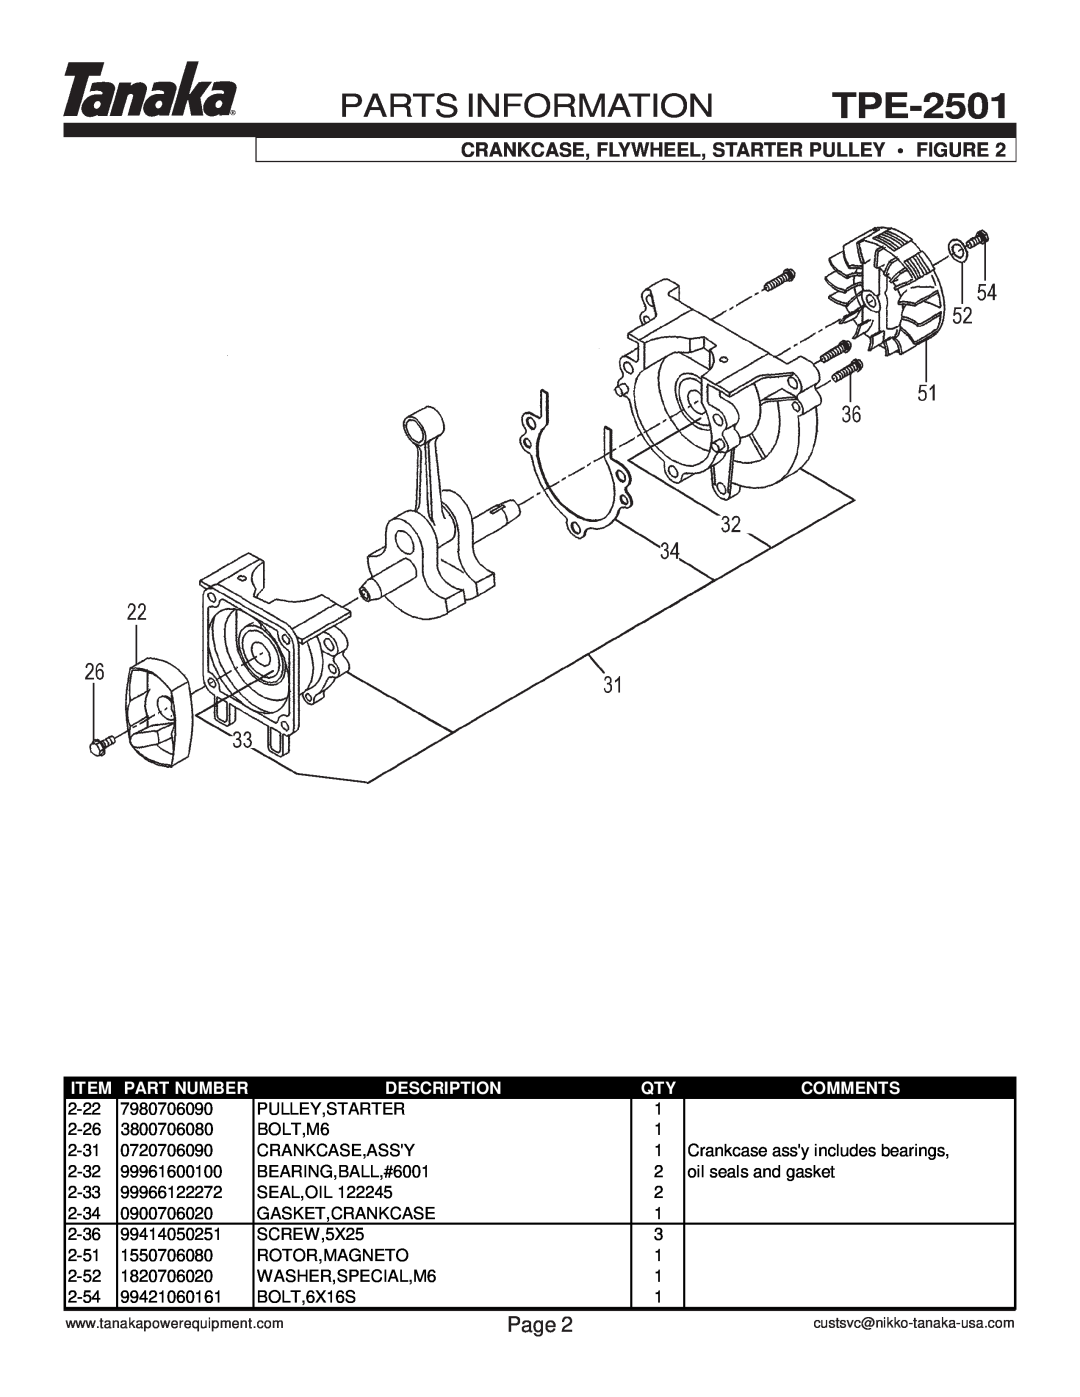 Tanaka TPE-2501 Parts Information, Crankcase, Flywheel, Starter Pulley Figure, Page, Part Number, Description, Comments 